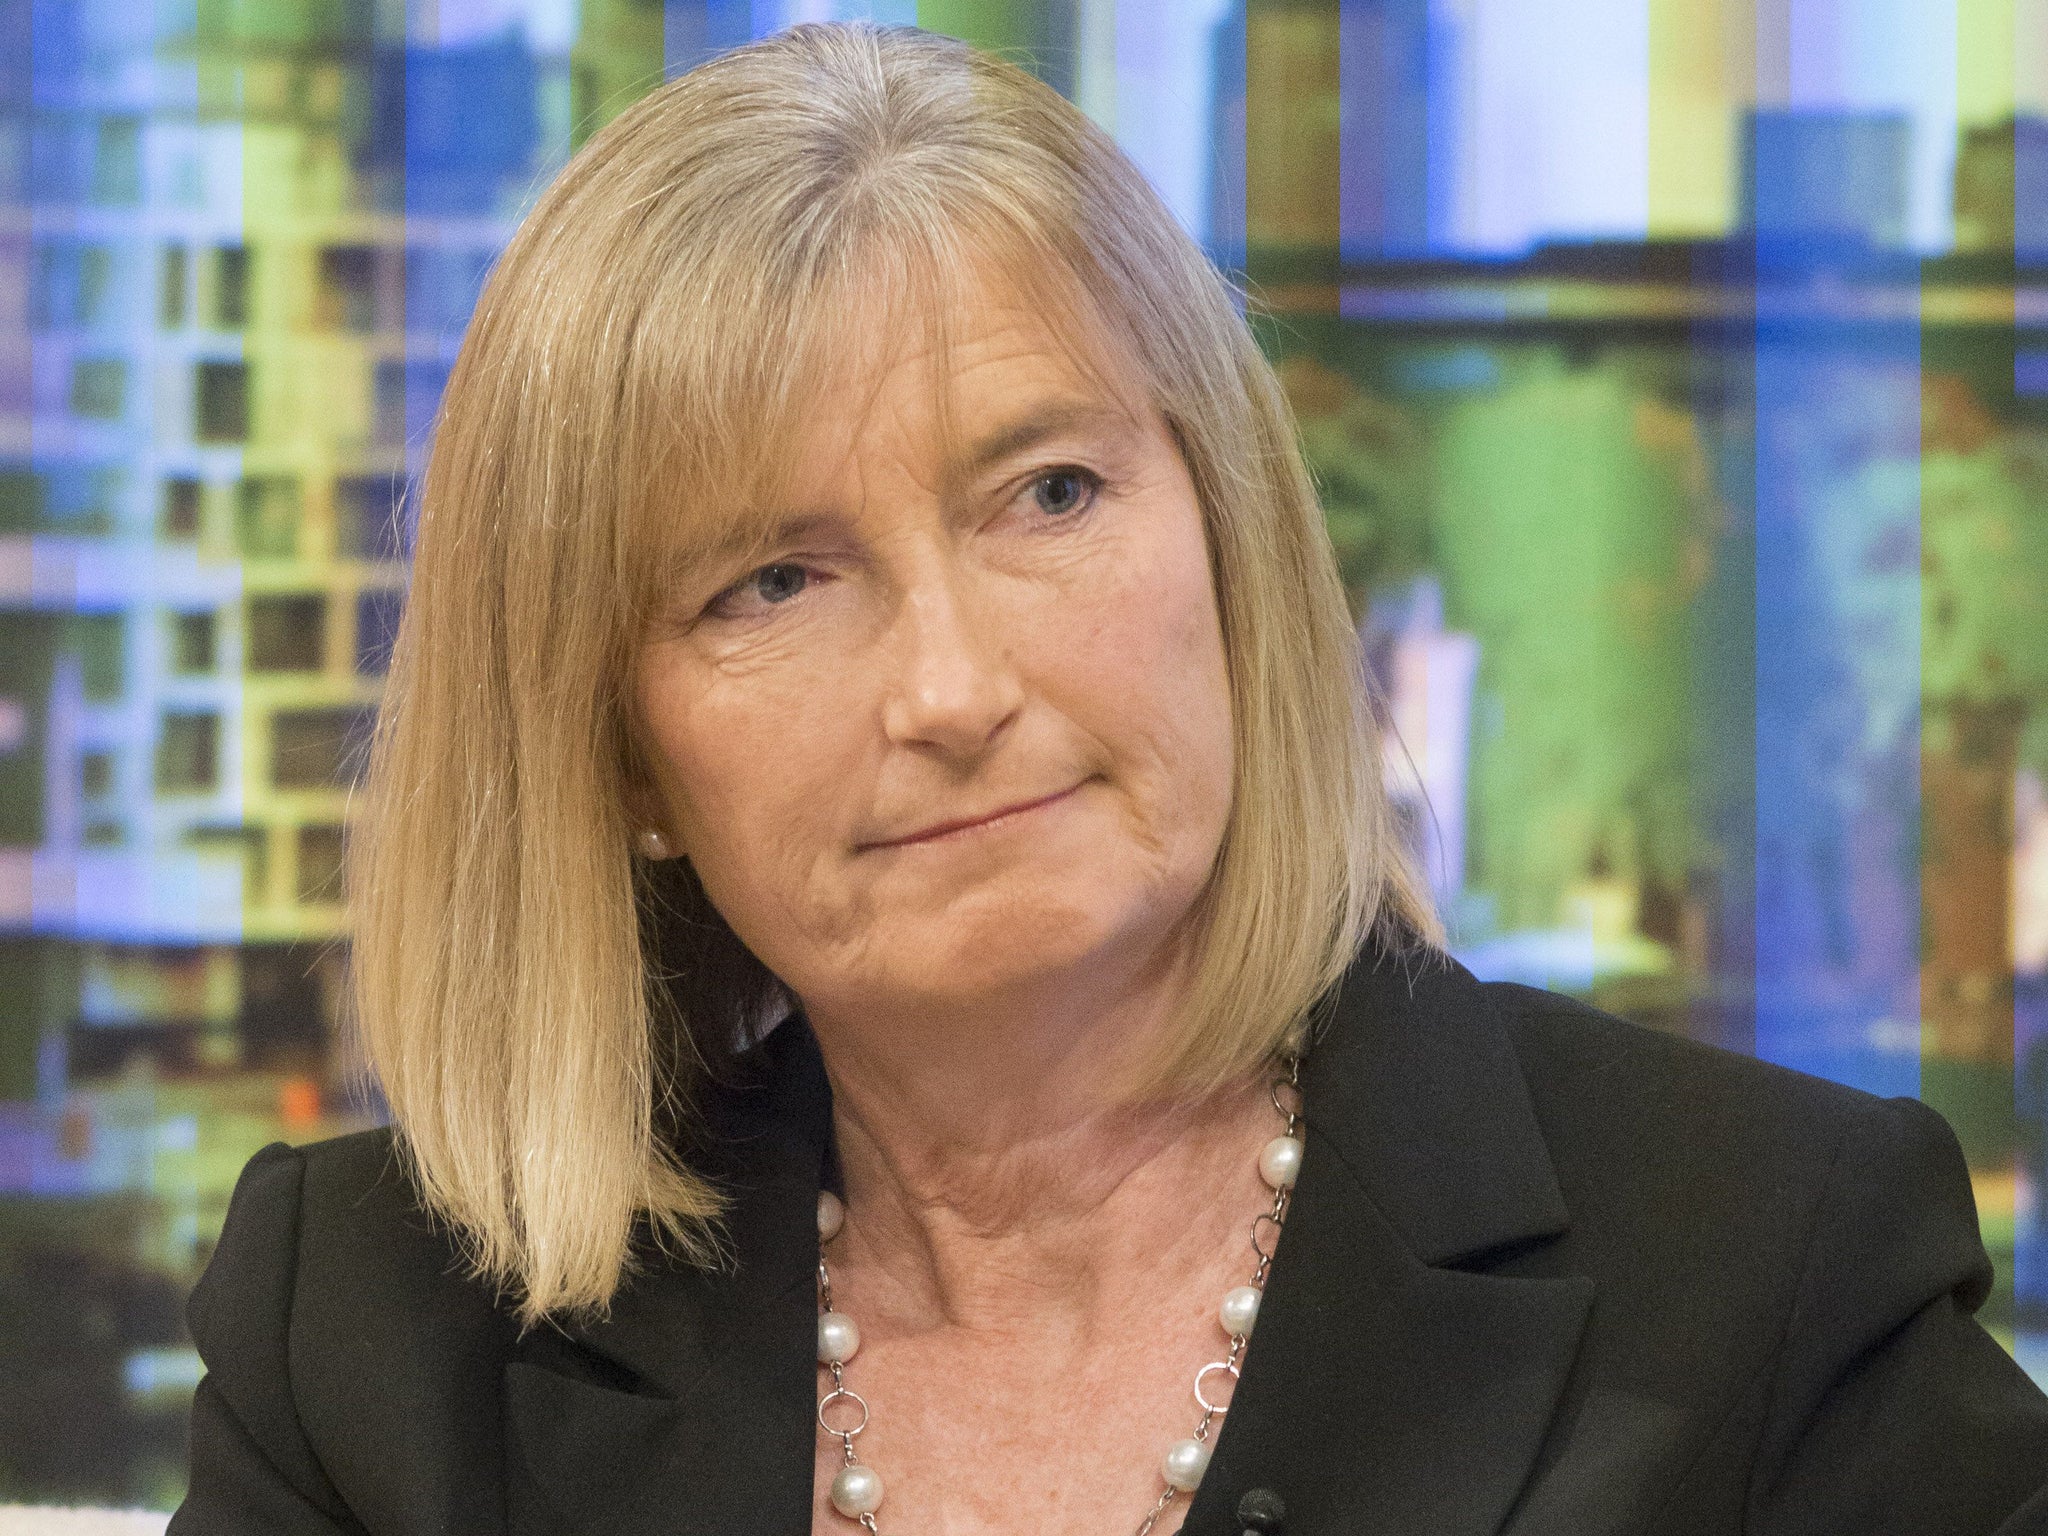 Dr Sarah Wollaston has said patients will think the the NHS is in a 'crisis'